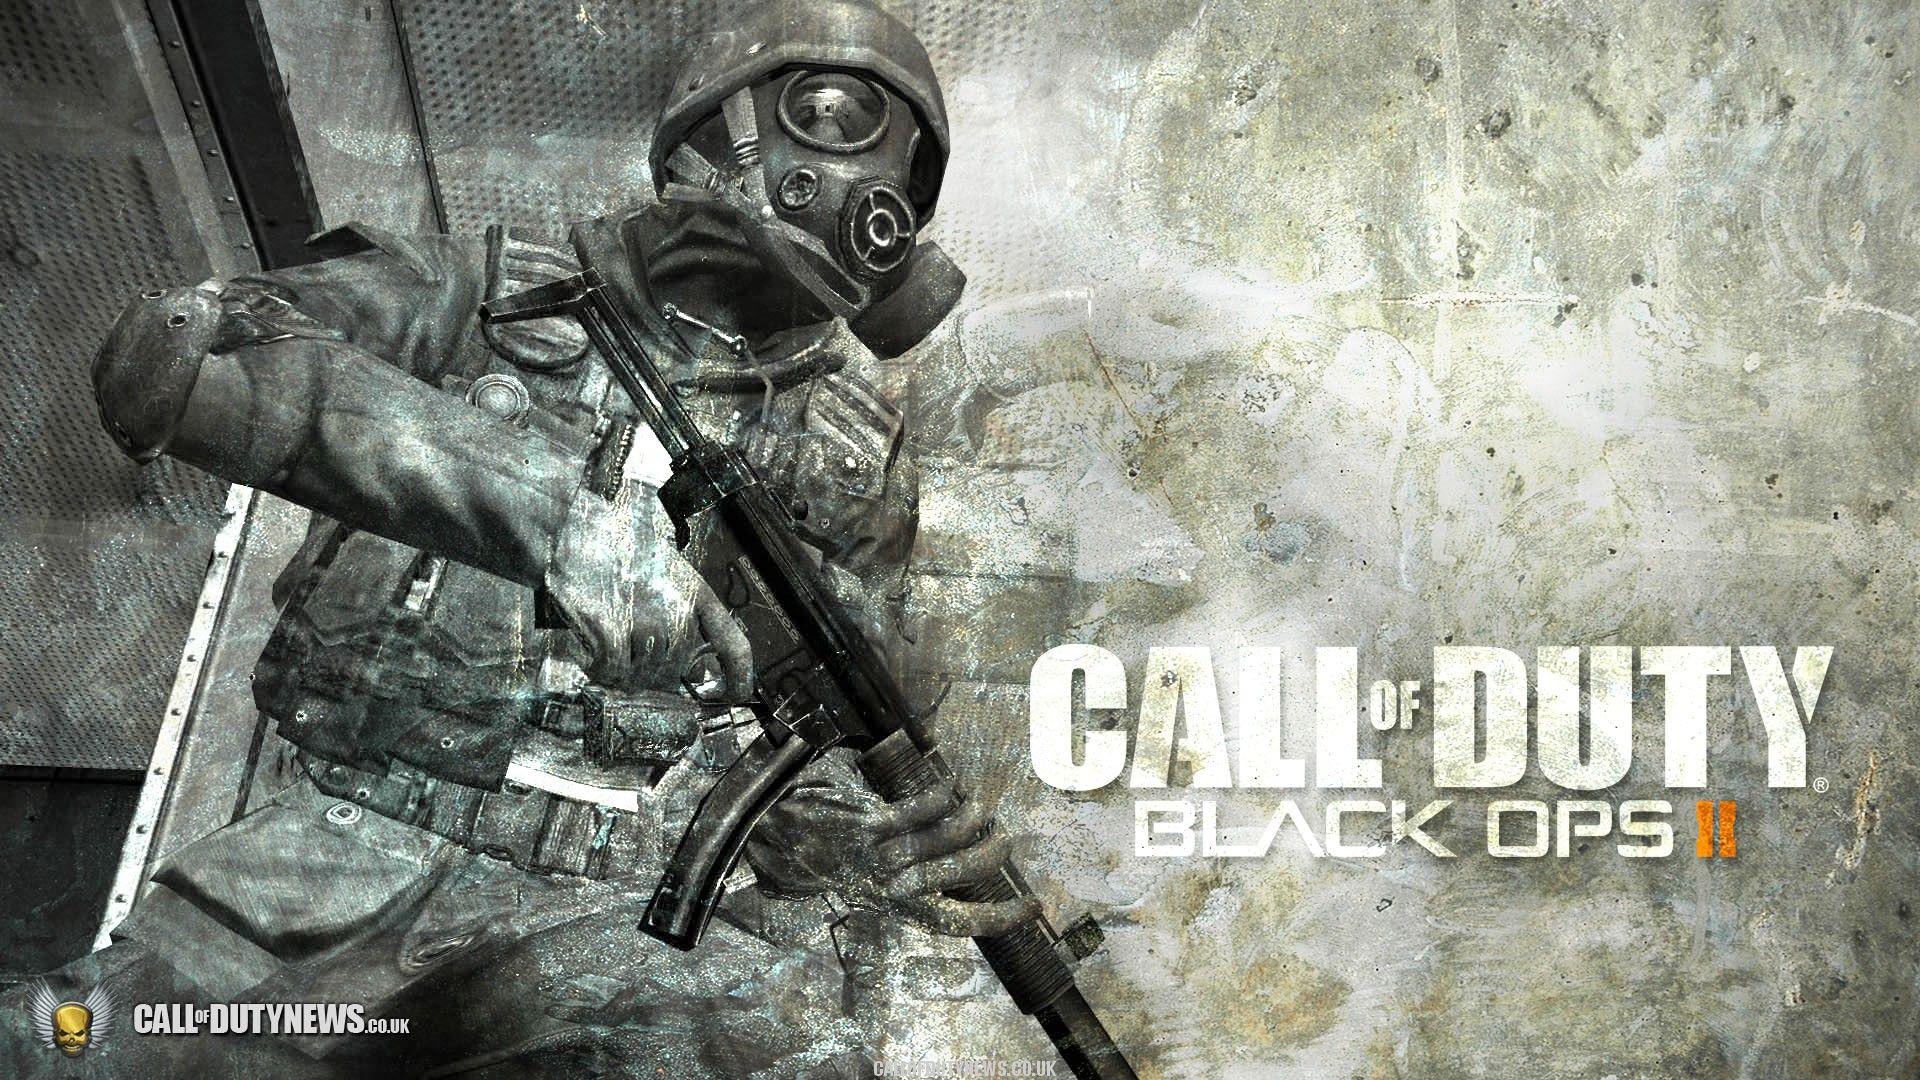 Image Call of Duty Black Ops Ii, Call of Duty Black Ops Weapon